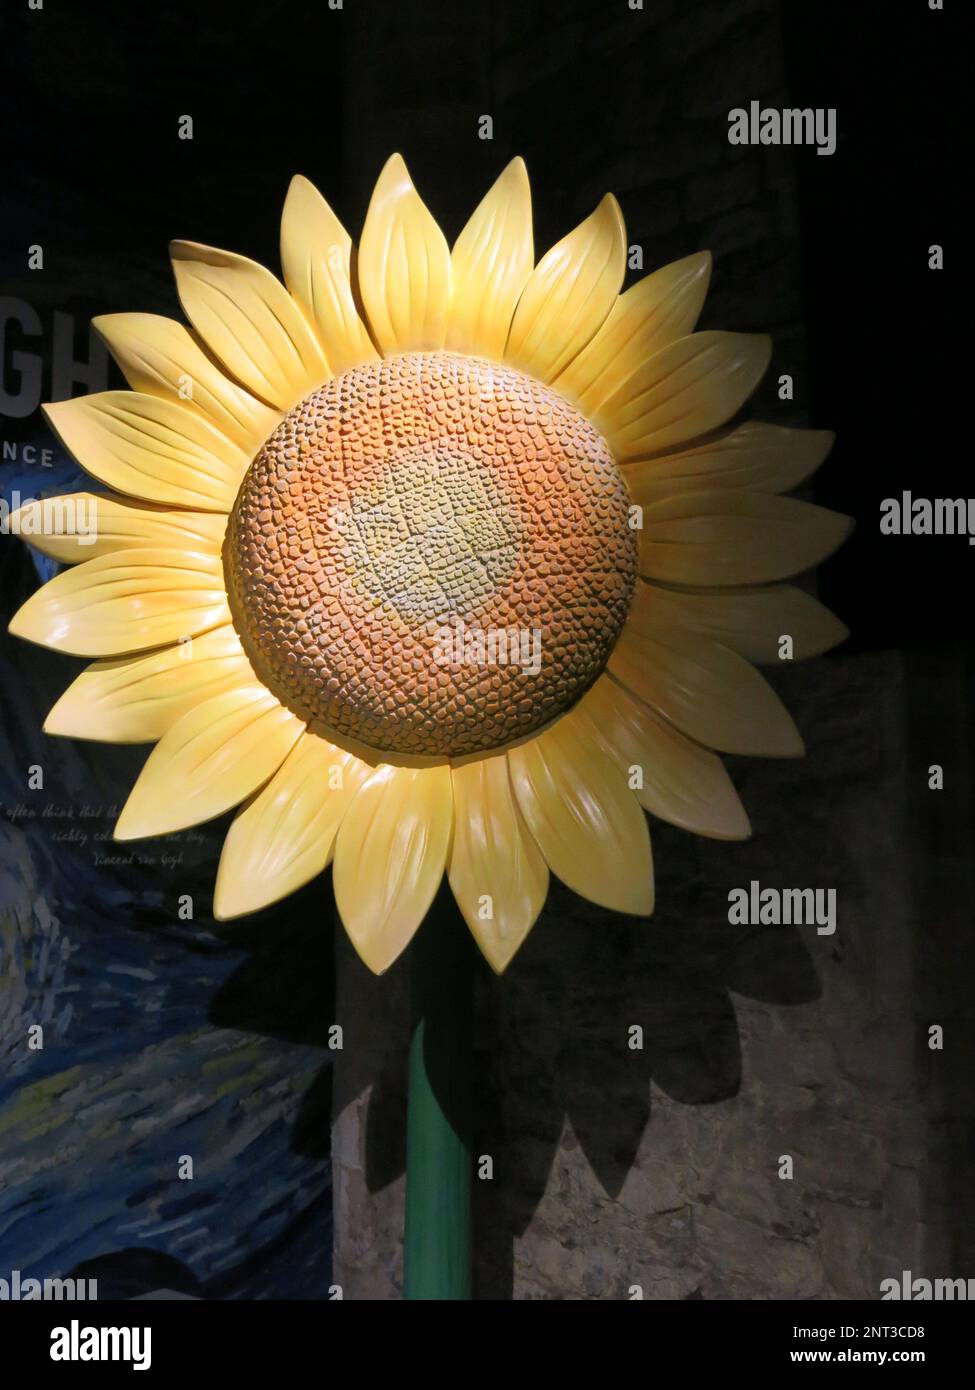 A large wooden sunflower greets you at the entrance to the Immersive Van Gogh Experience in Leicester, an iconic emblem of the artist's paintings. Stock Photo